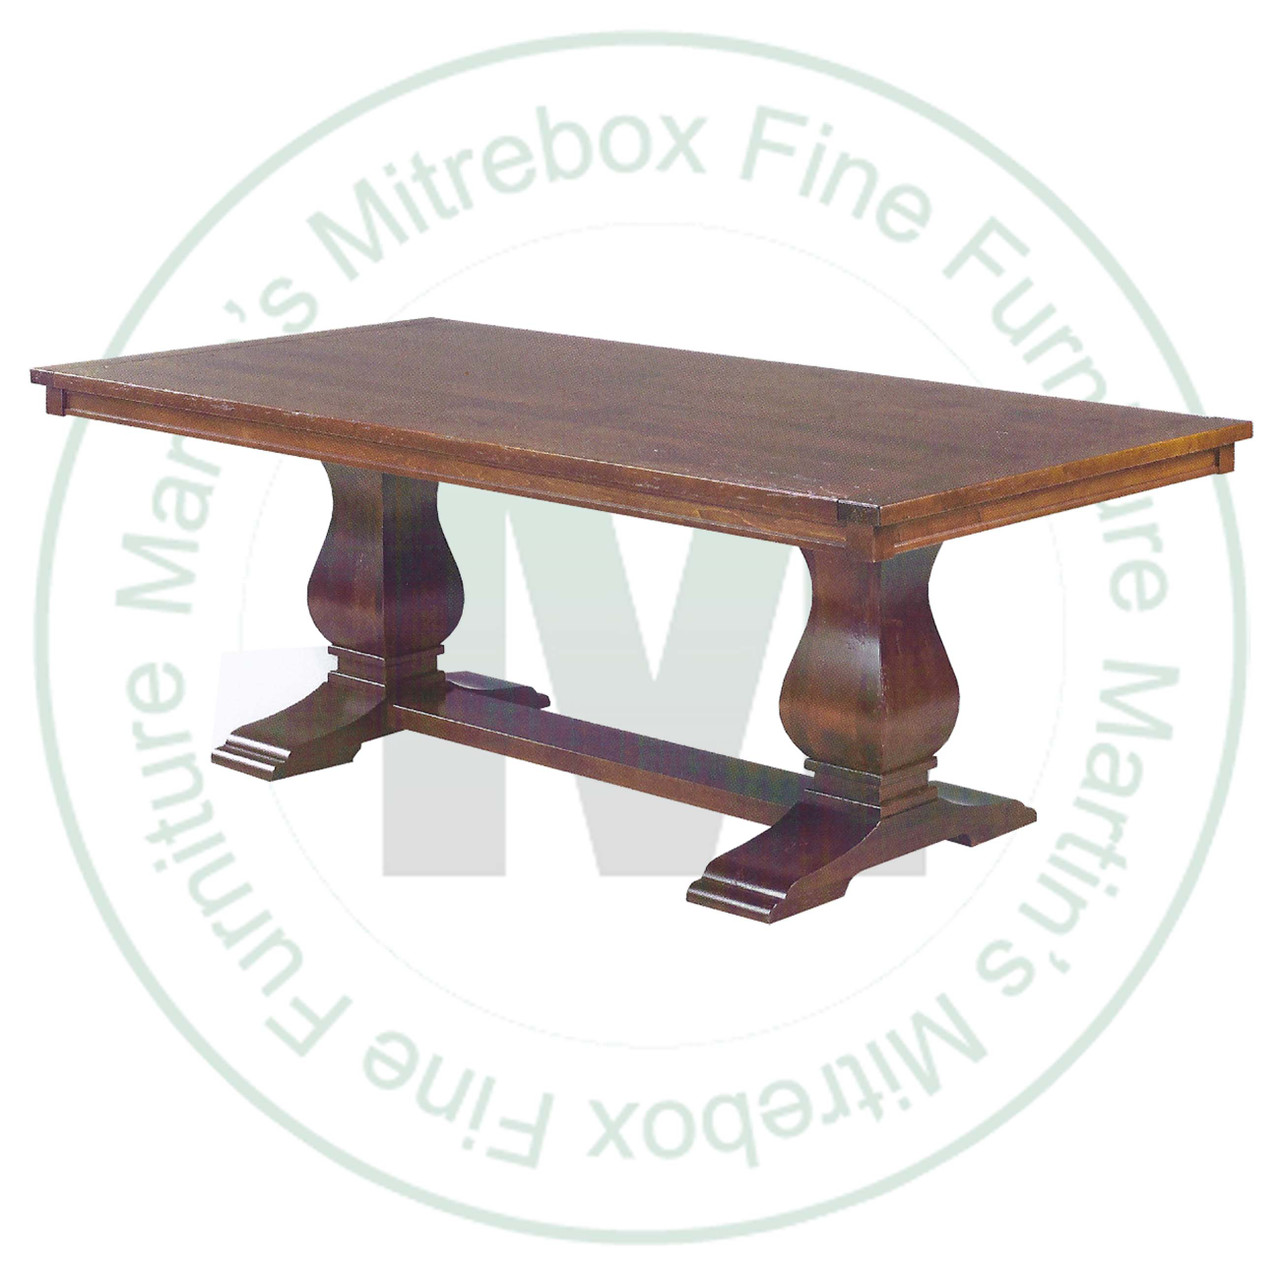 Maple Socrates Double Pedestal Table 48''D x 66''W x 30''H With 3 - 12'' Leaves. Table Has 1.25'' Thick Top